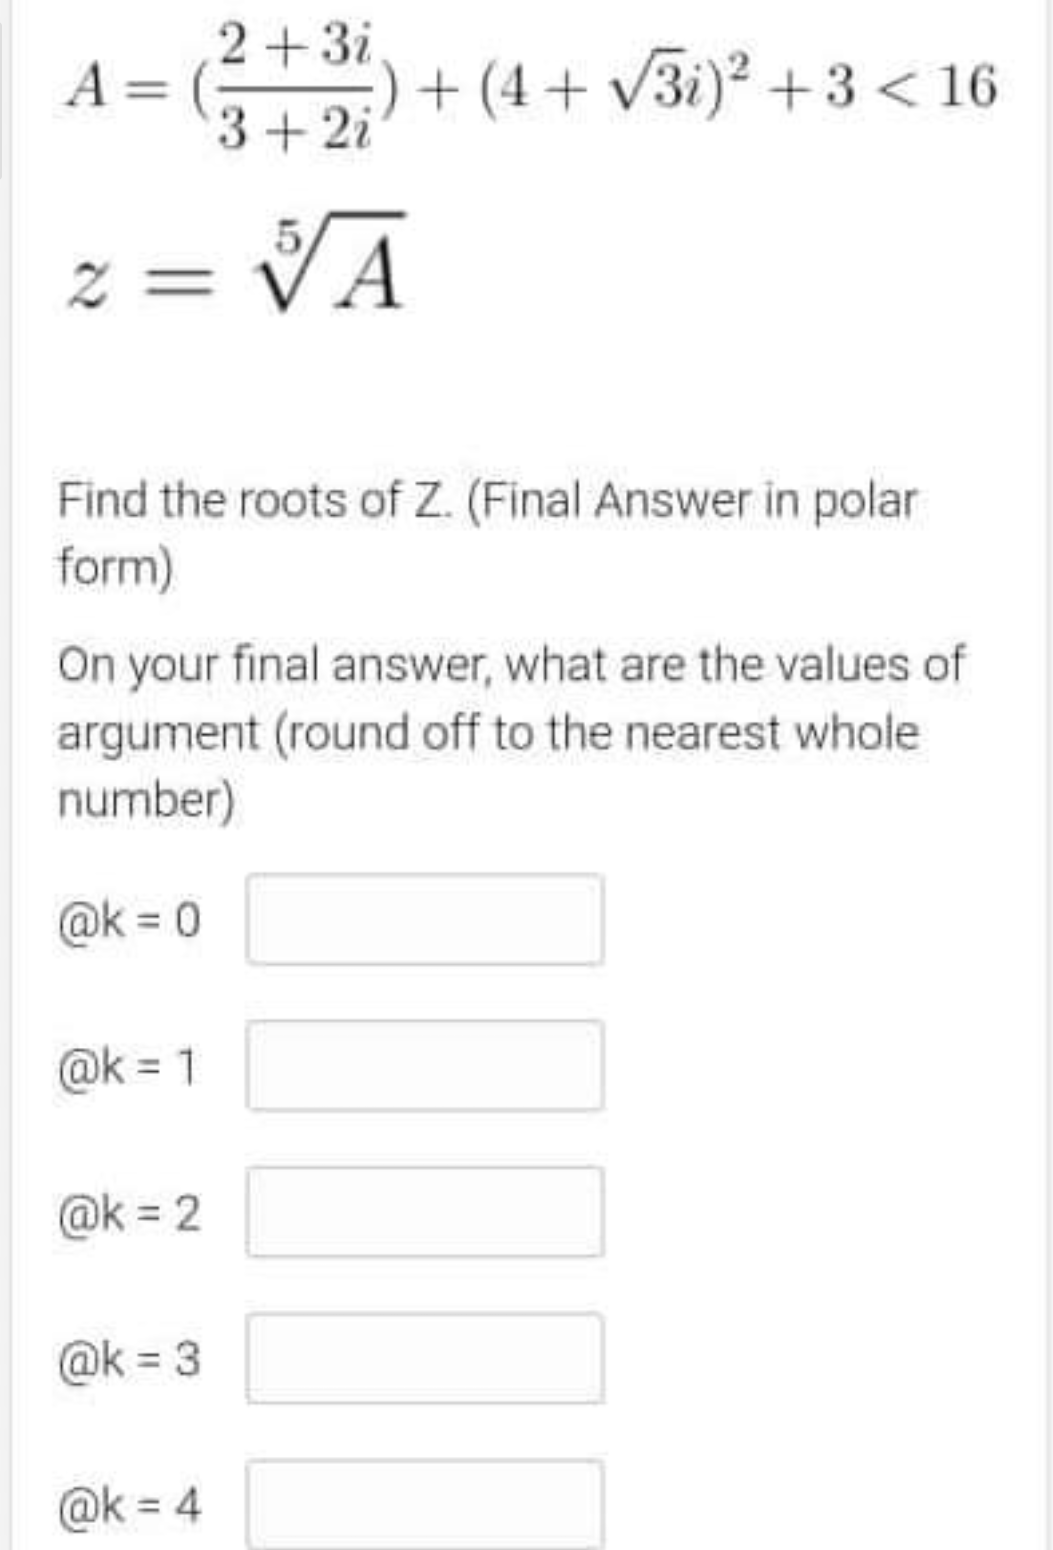 2+3i
:) + (4 + V3i)² +3 < 16
A = (;
3+2i
z = VA
Find the roots of Z. (Final Answer in polar
form)
On your final answer, what are the values of
argument (round off to the nearest whole
number)
@k = 0
@k = 1
@k = 2
@k = 3
@k = 4
%3D
